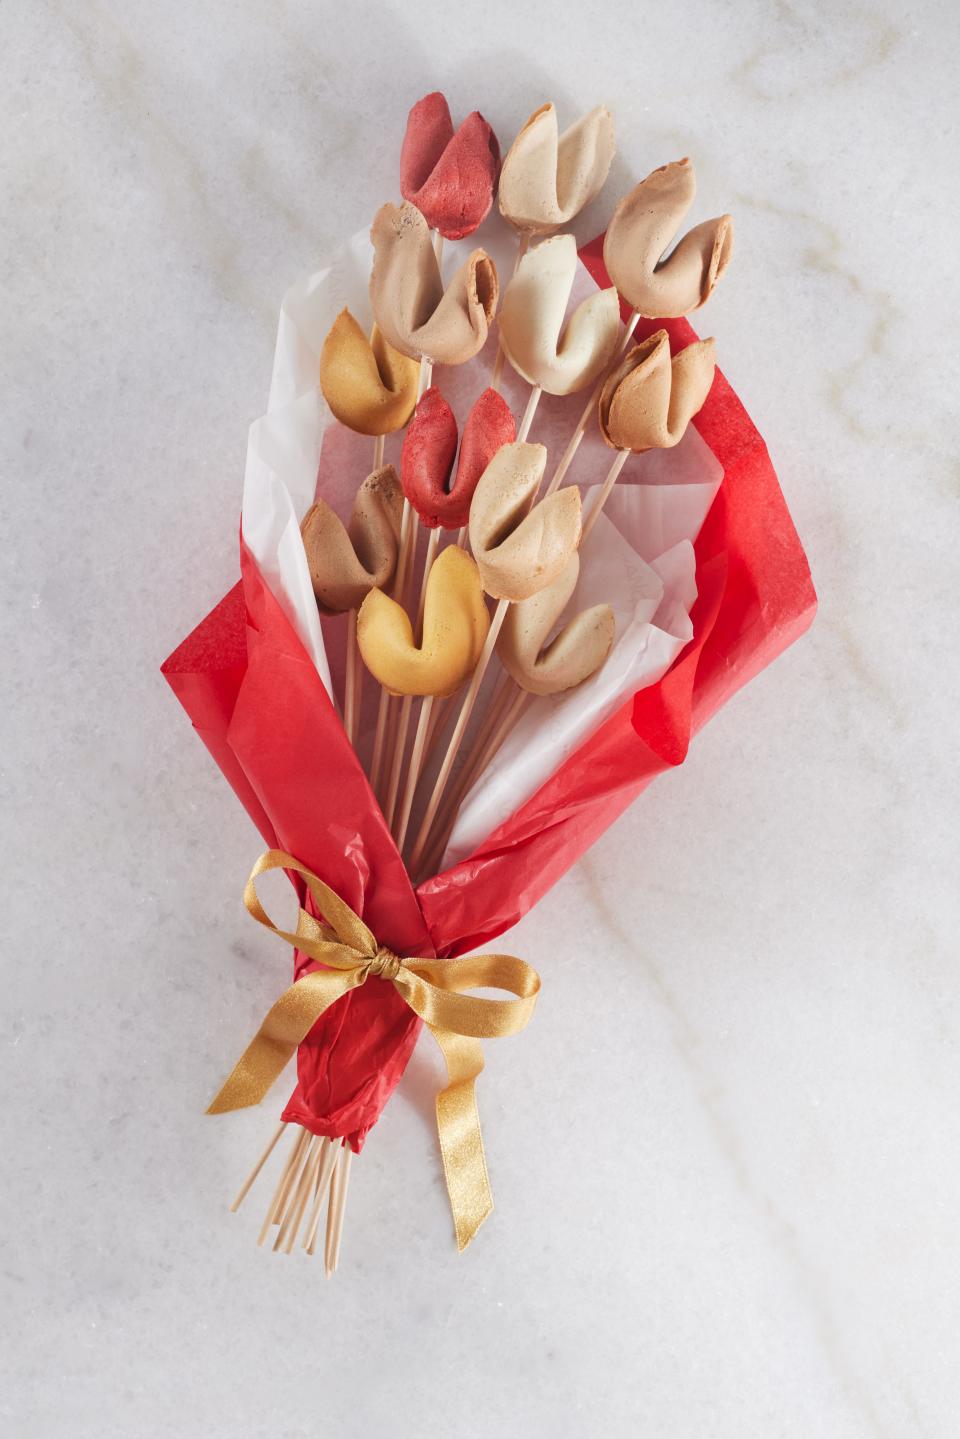 P.F. Chang's is offering a Fortune Cookie Flower Bouquet for $39.99 for a limited time to celebrate Mother's Day.